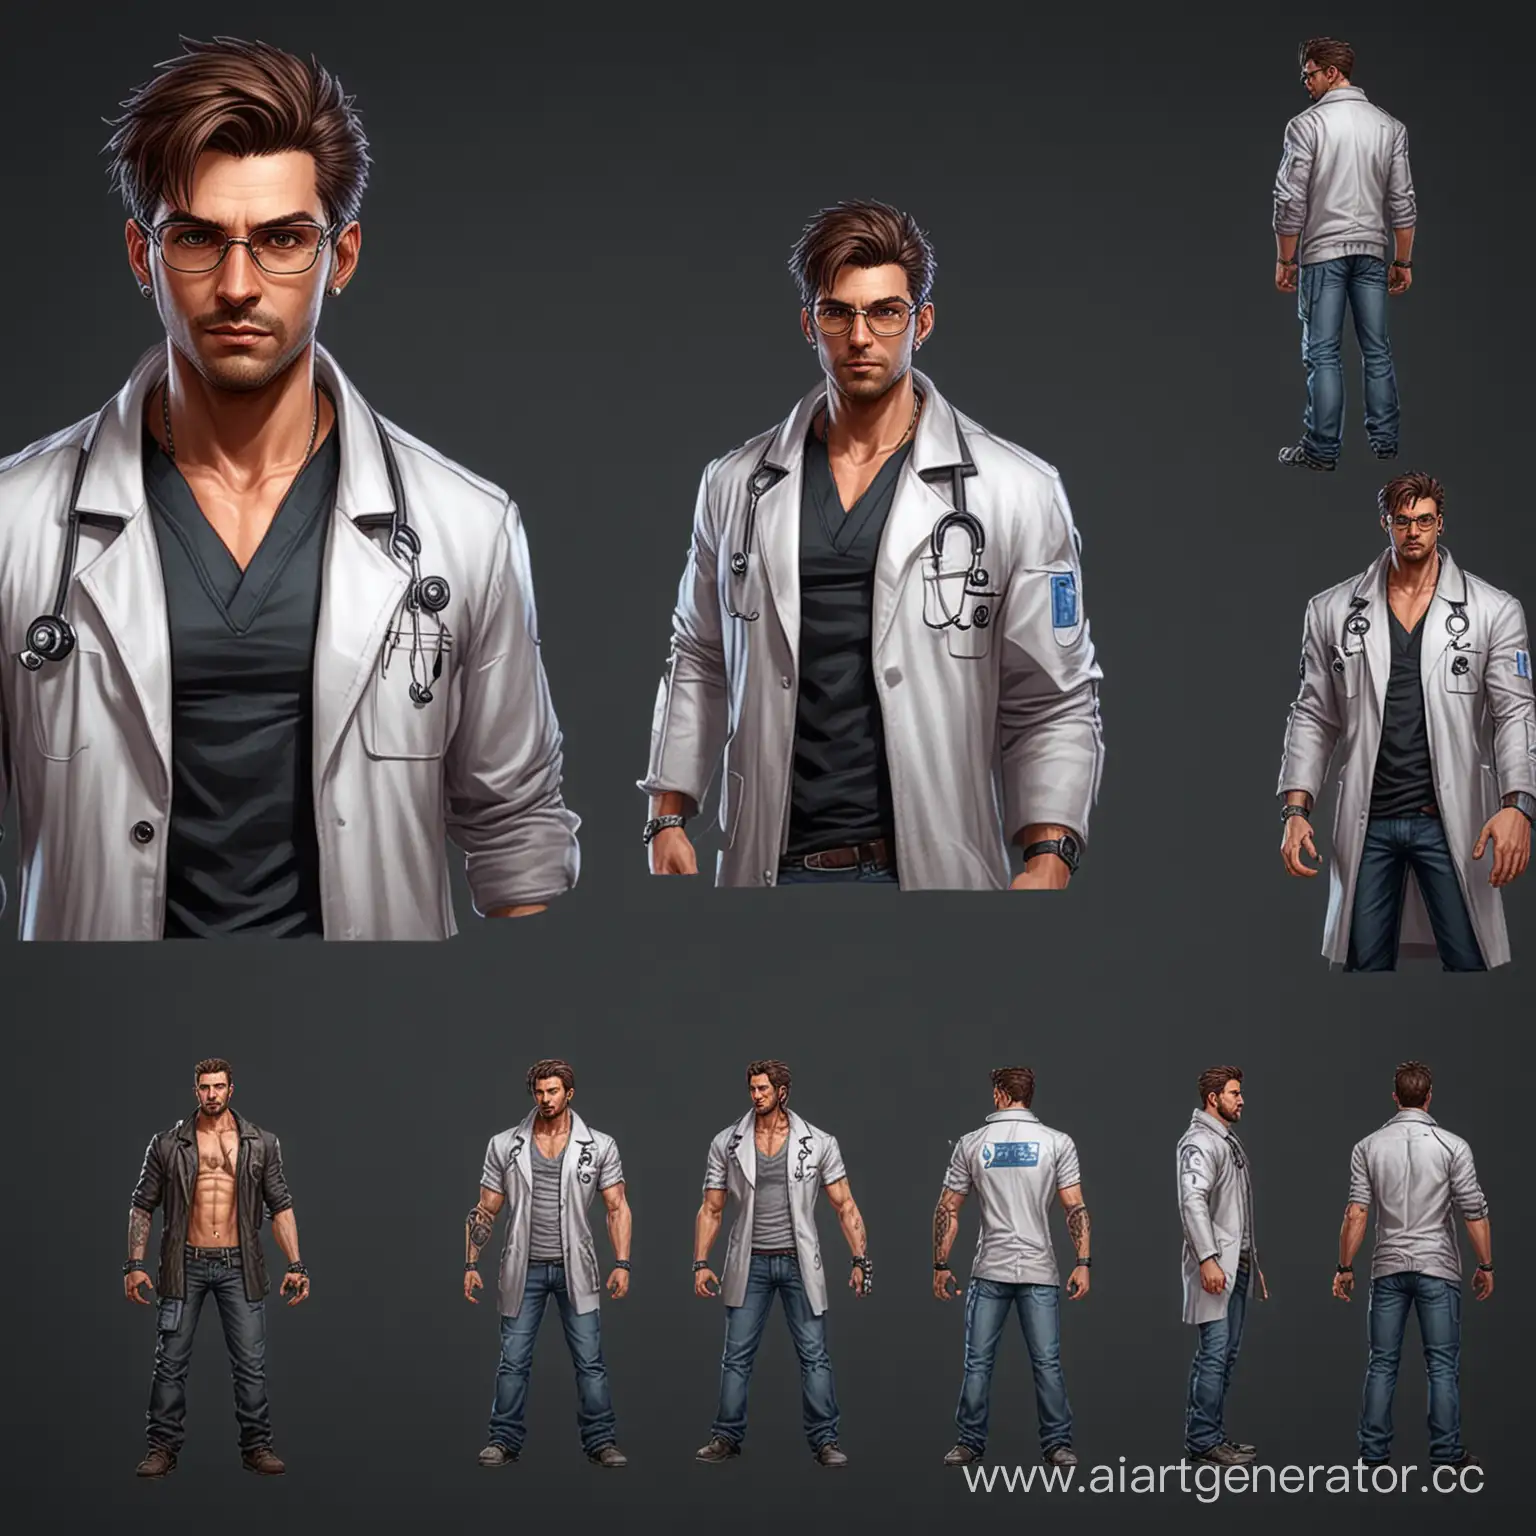 Game assets, visual novel, male character sprite, doctor, cyberpunk